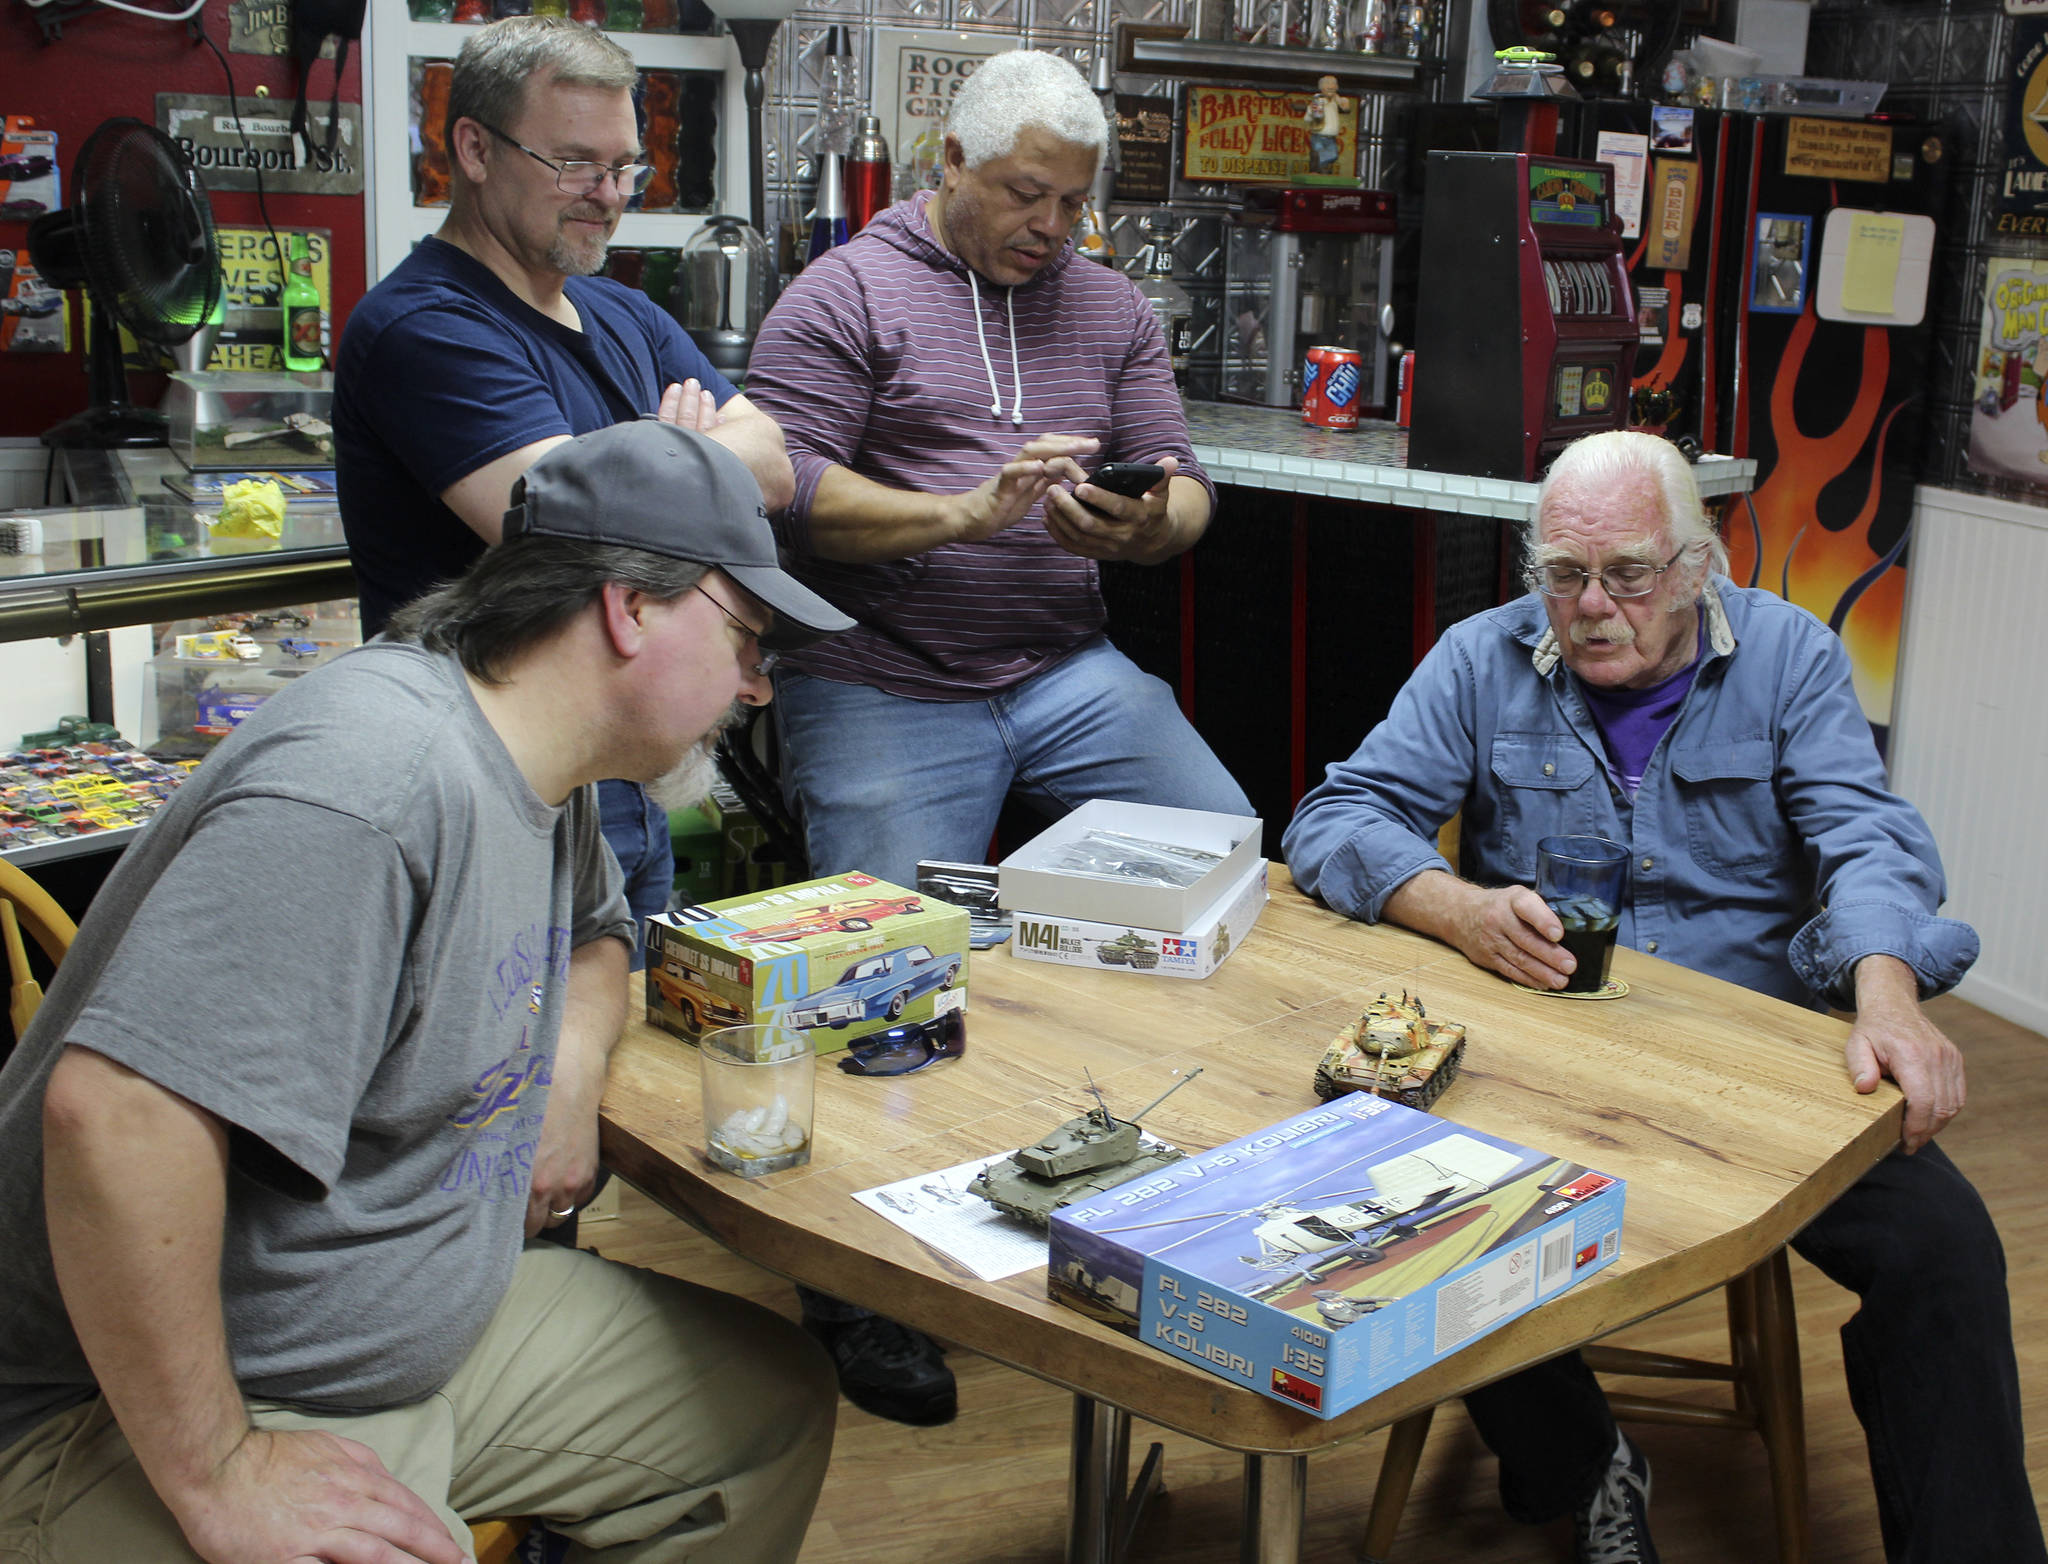 The Friday evening club of small-scale modelers discuss who’s building other tiny tanks needed for an upcoming contest. Left to right are Dave Campbell, Roy Schlicht, Ray Scott and Fred Benninghoff.